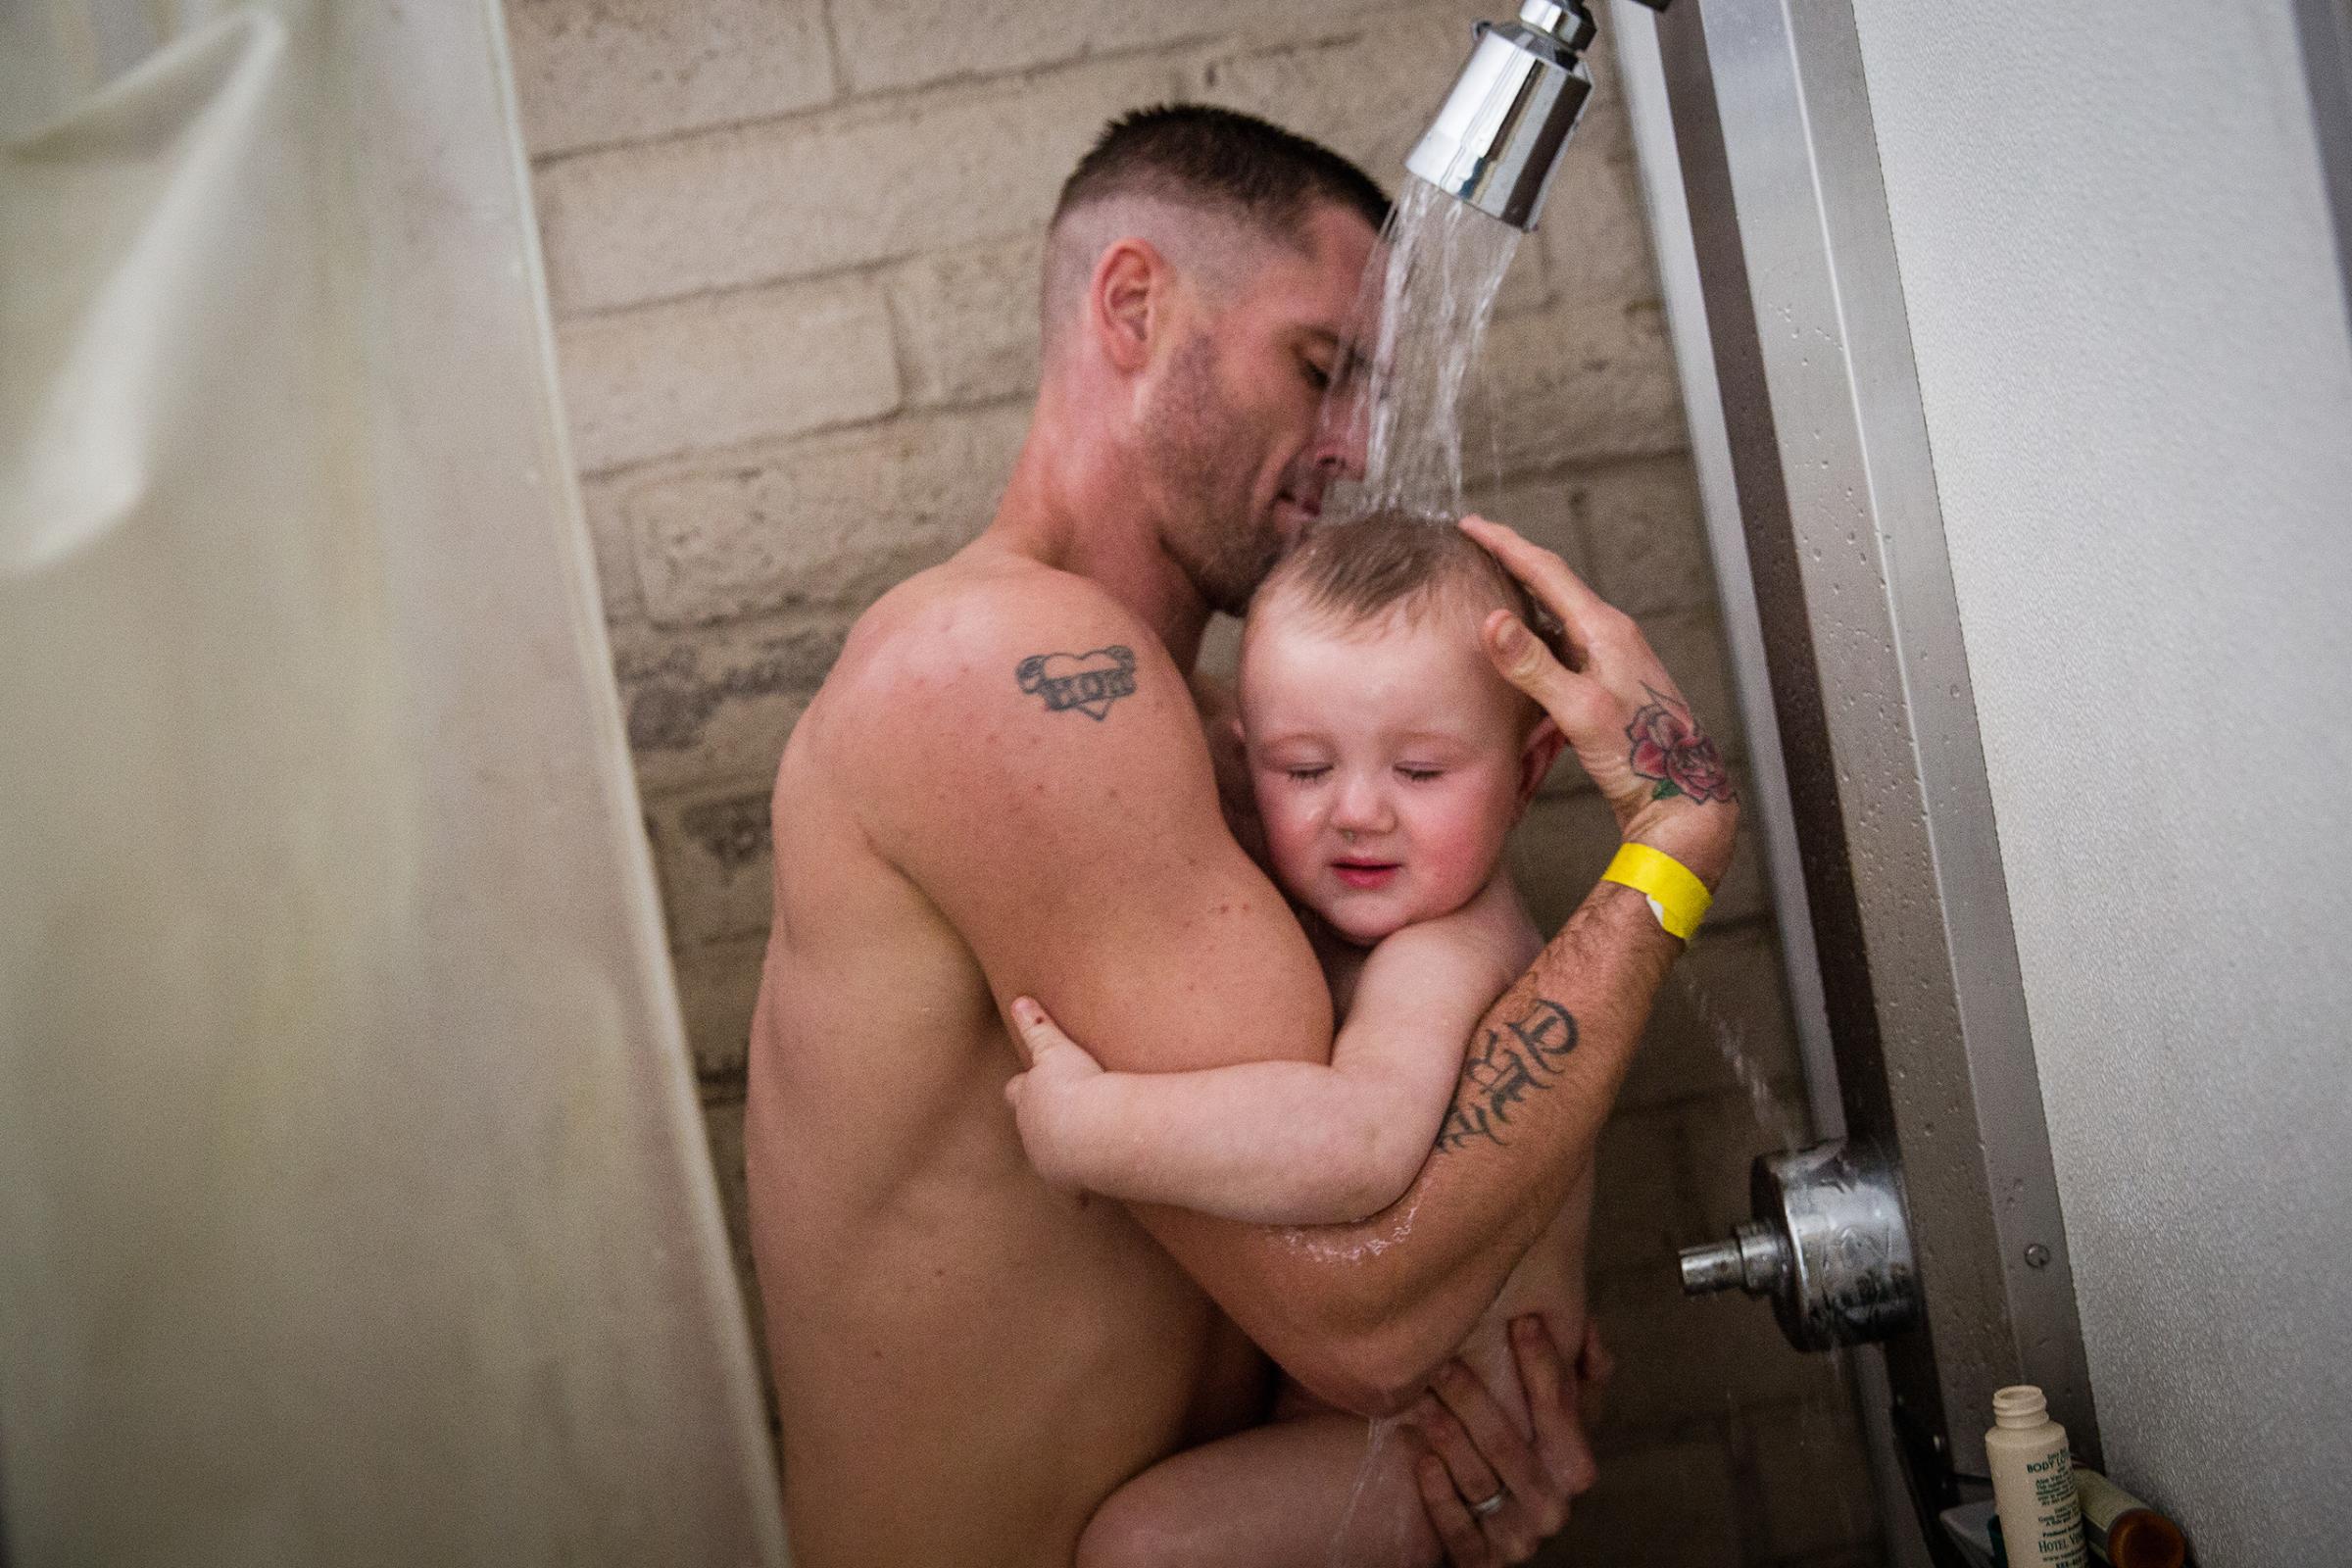 Albert Morrison, Sr., and his 14-month-old son Albert, Jr. take a shower for the first time in three days at the evacuation center at the Butte County Fairgrounds in Chico, California on Feb. 15, 2017.